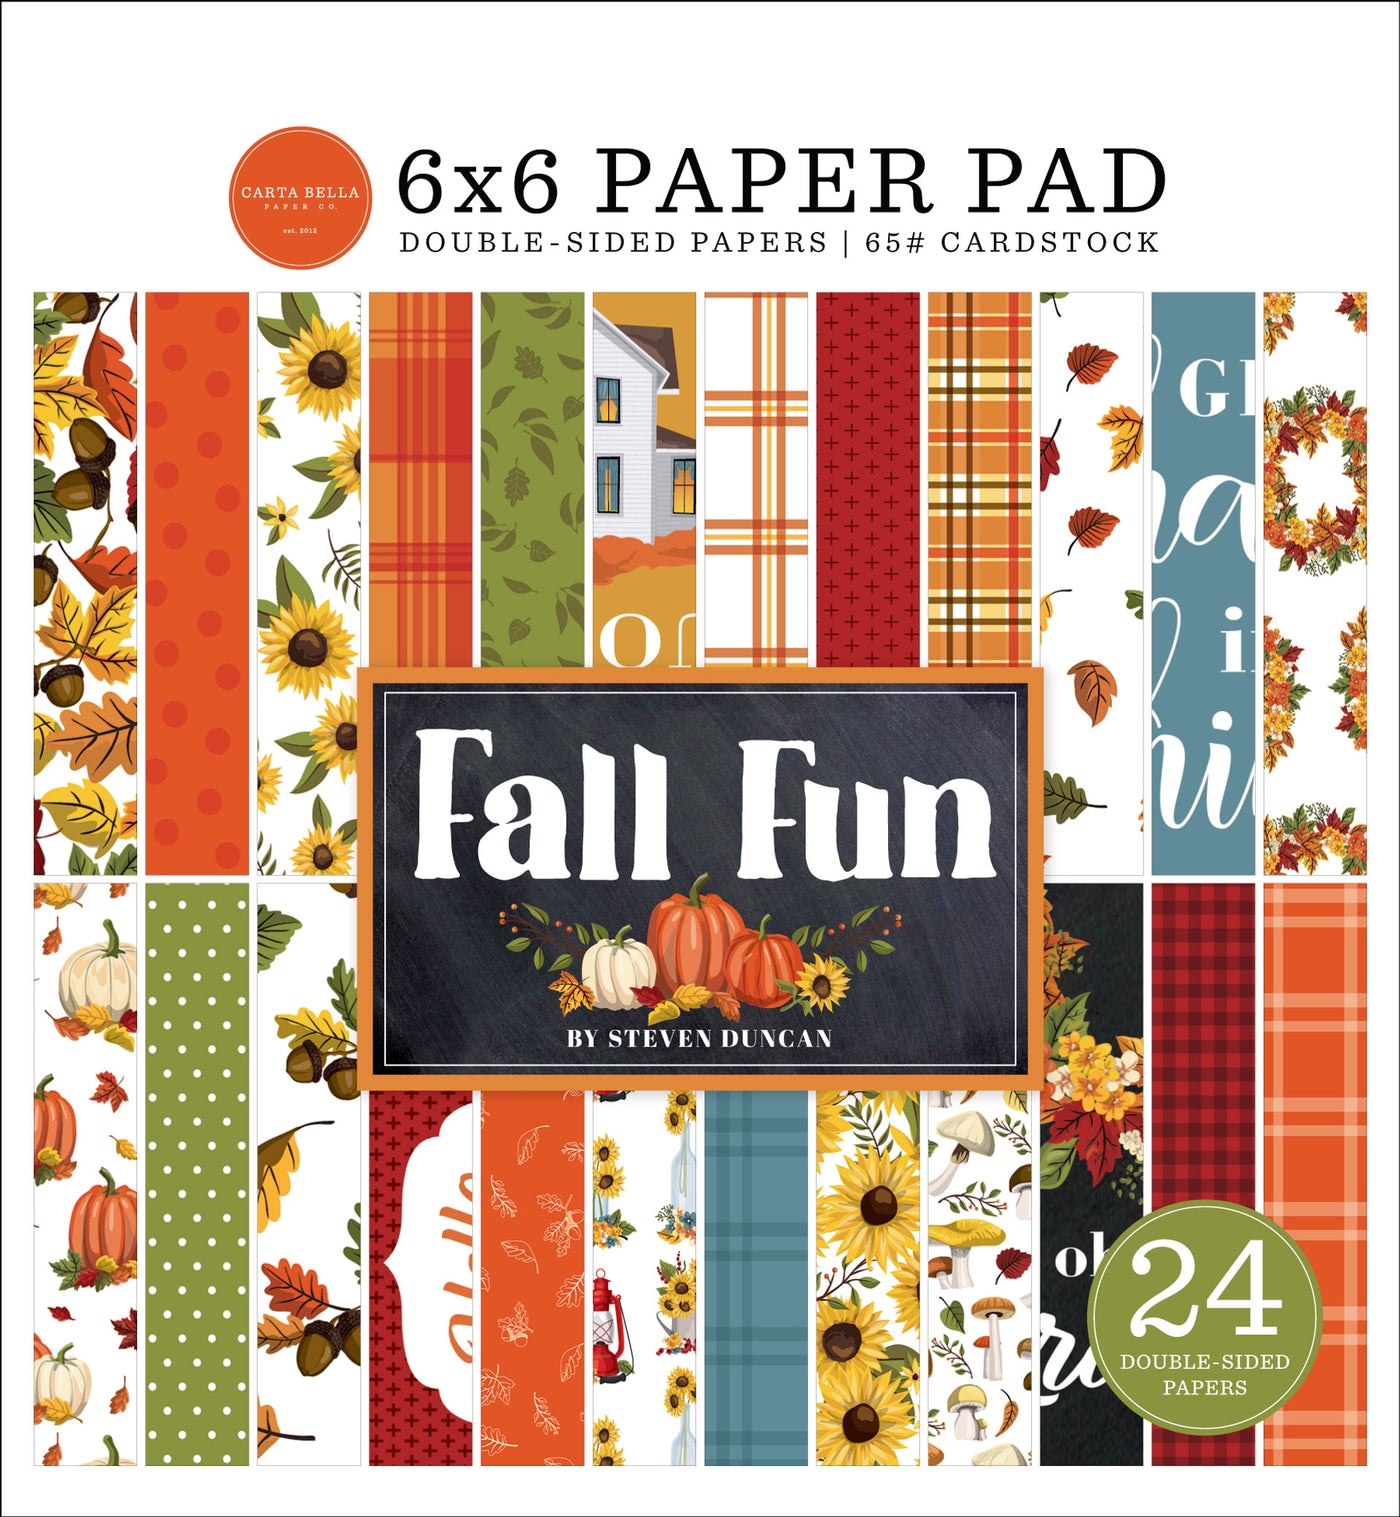 This 6x6 Fall Market pad has 24 double-sided sheets. It is great for autumn card making and other seasonal craft projects. It matches the Fall Fun set from Carta Bella.  